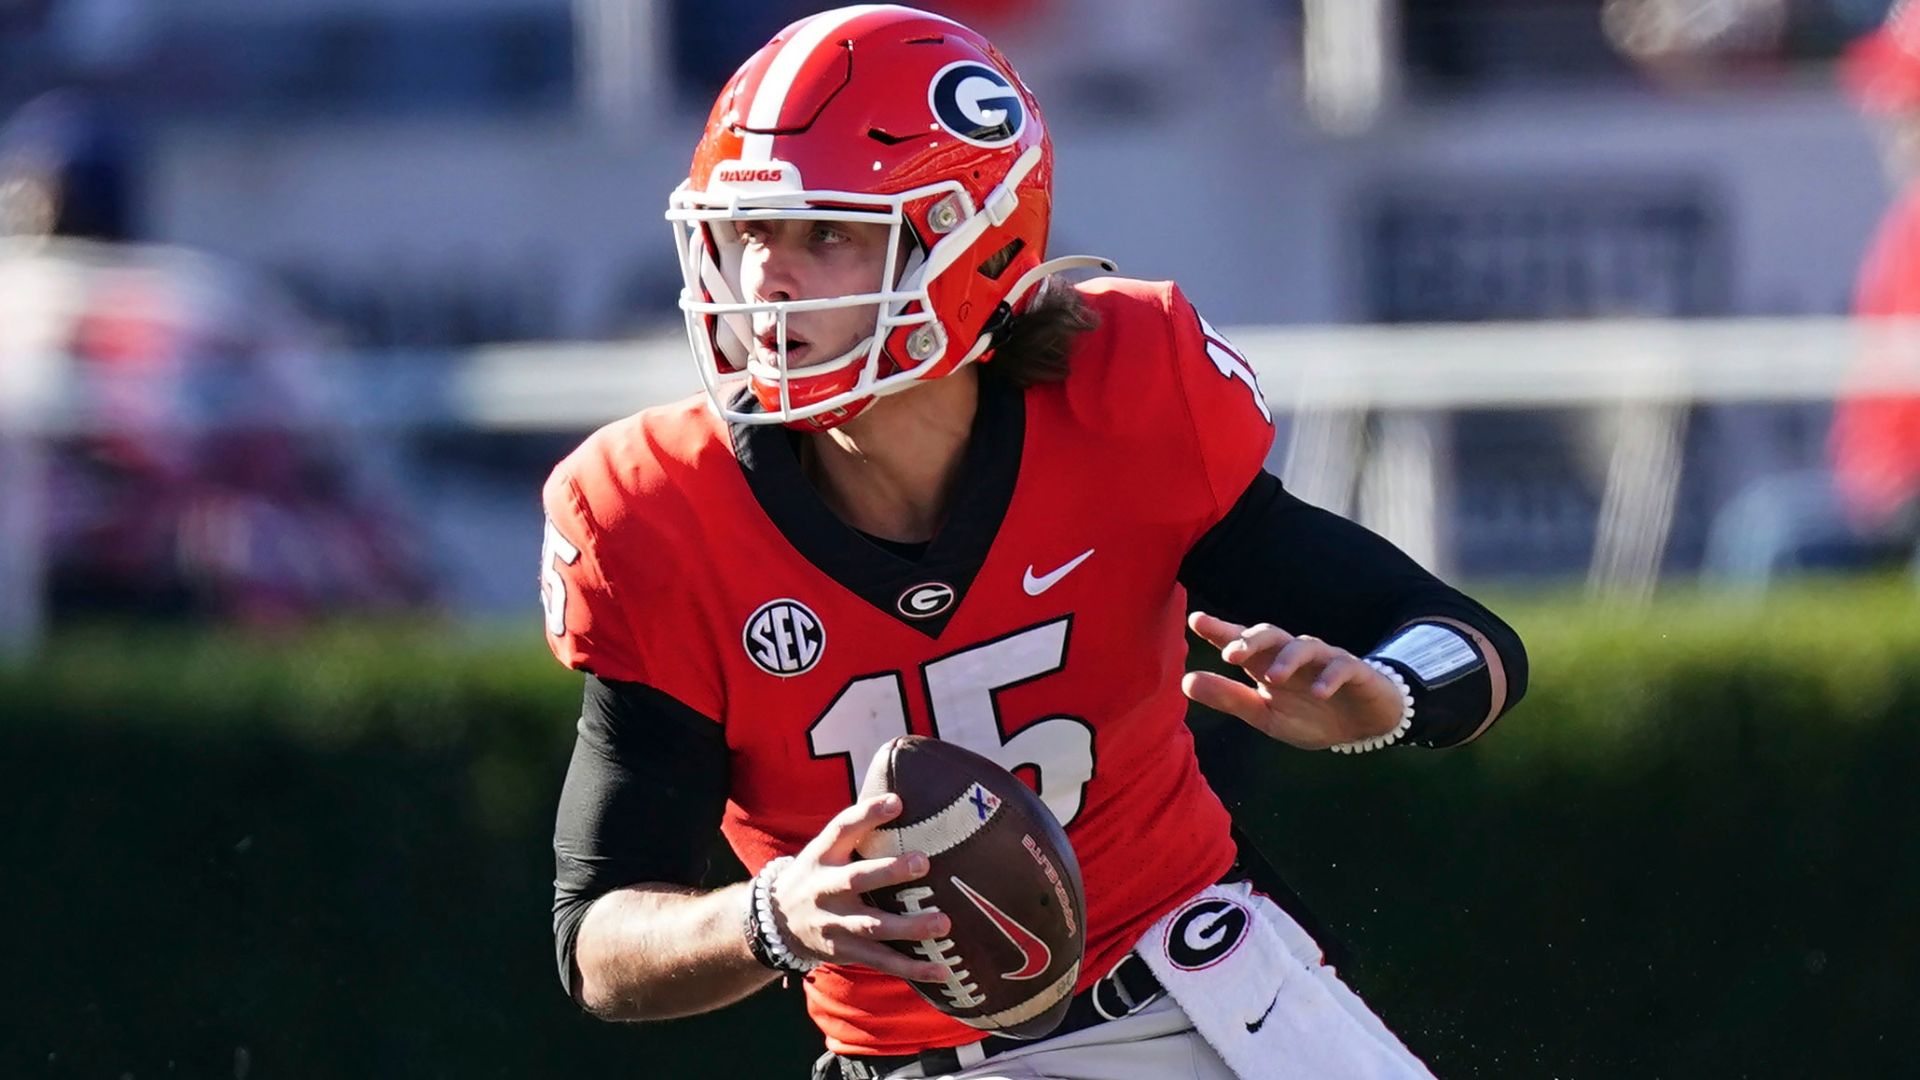 UGA's stable environment takes pressure off QB Beck